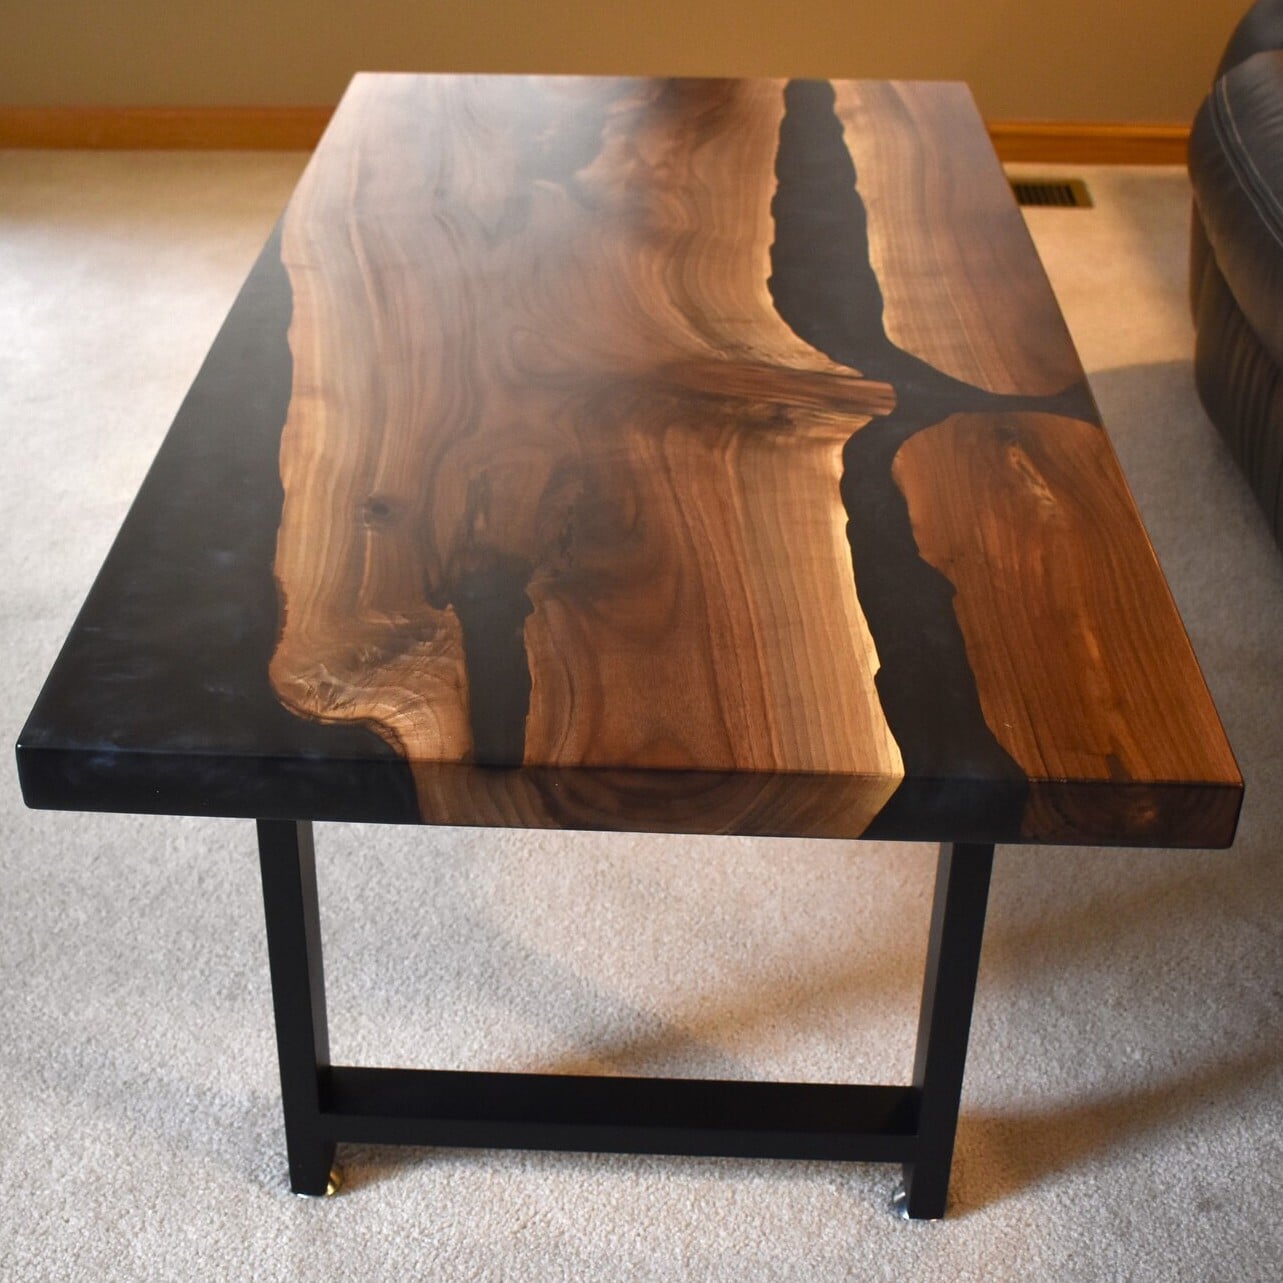 Epoxy River Black Walnut Coffee Table FREE DELIVERY! » Made In